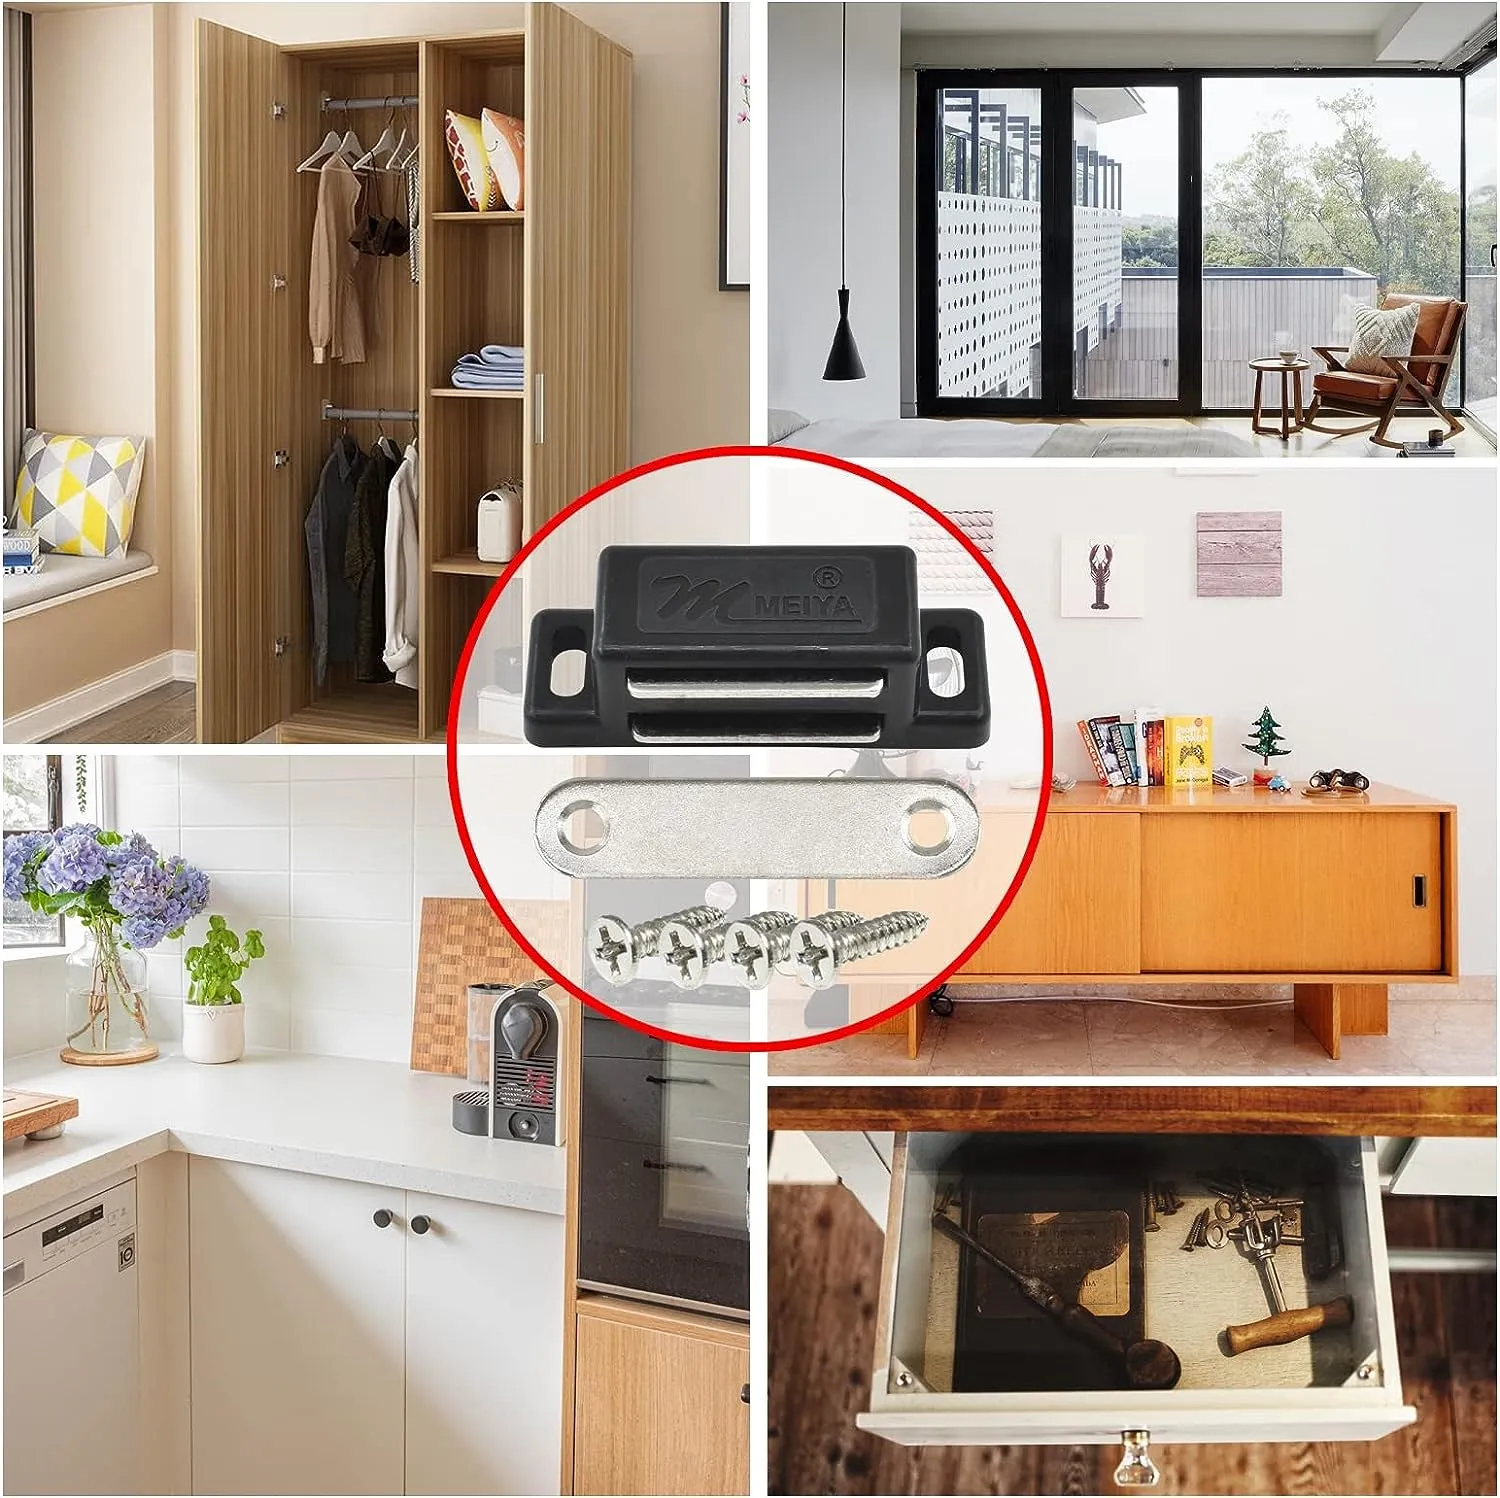 1 Set Cabinet Magnet Latch Door Catches Magnet Suction Bar Silence  Non-flapping Cupboard Wardrobe Magnetic Closer